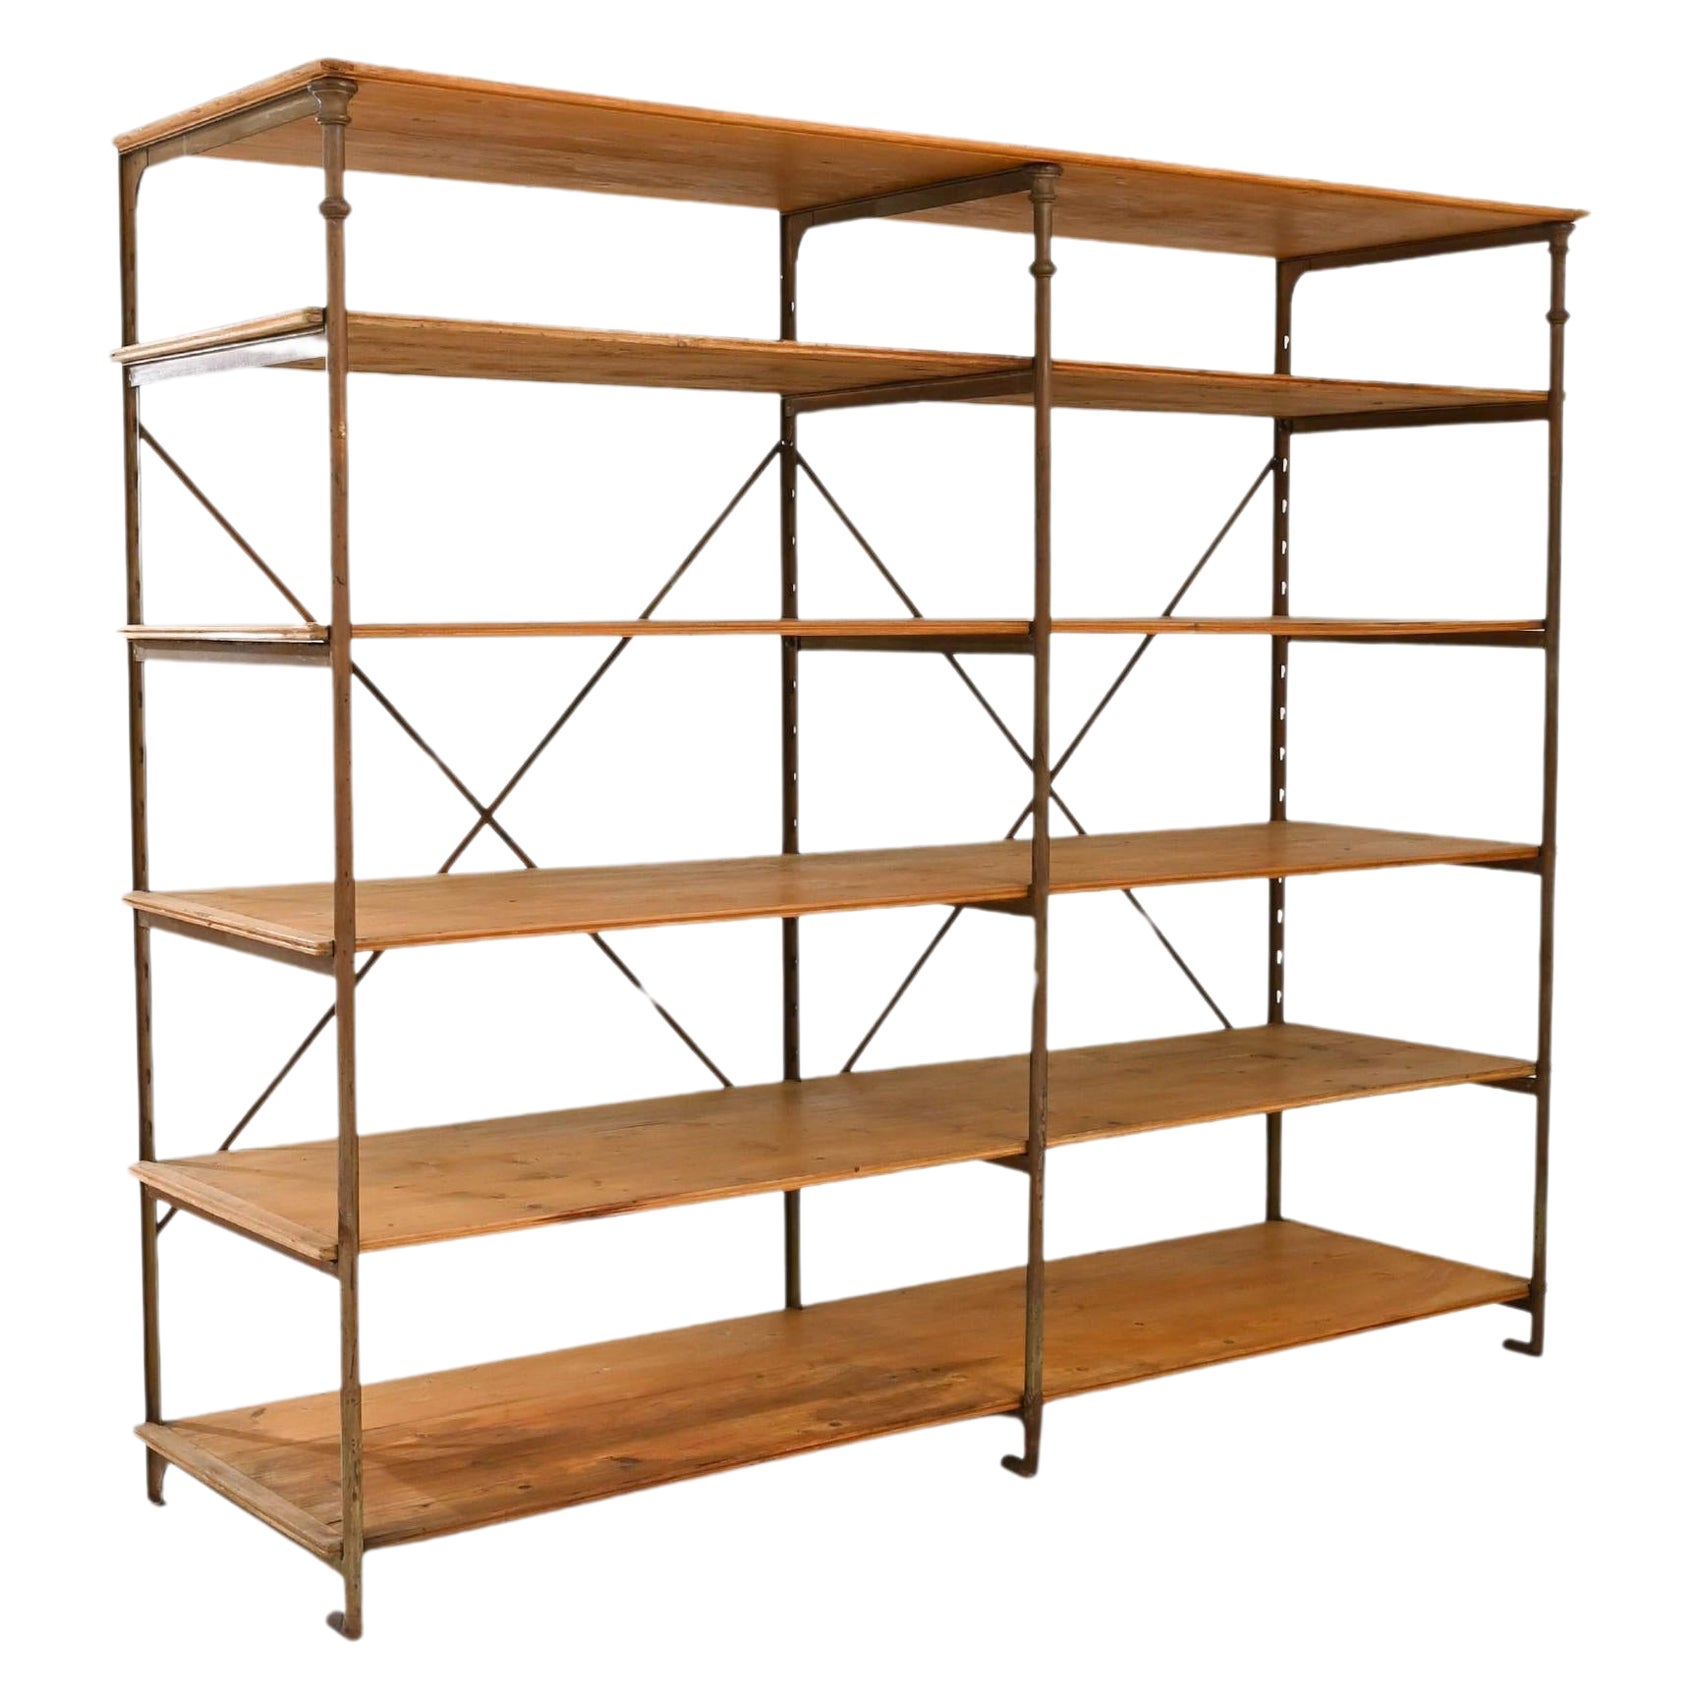 Turn of the Century Parisian Industrial Shelving by Theodore Scherf